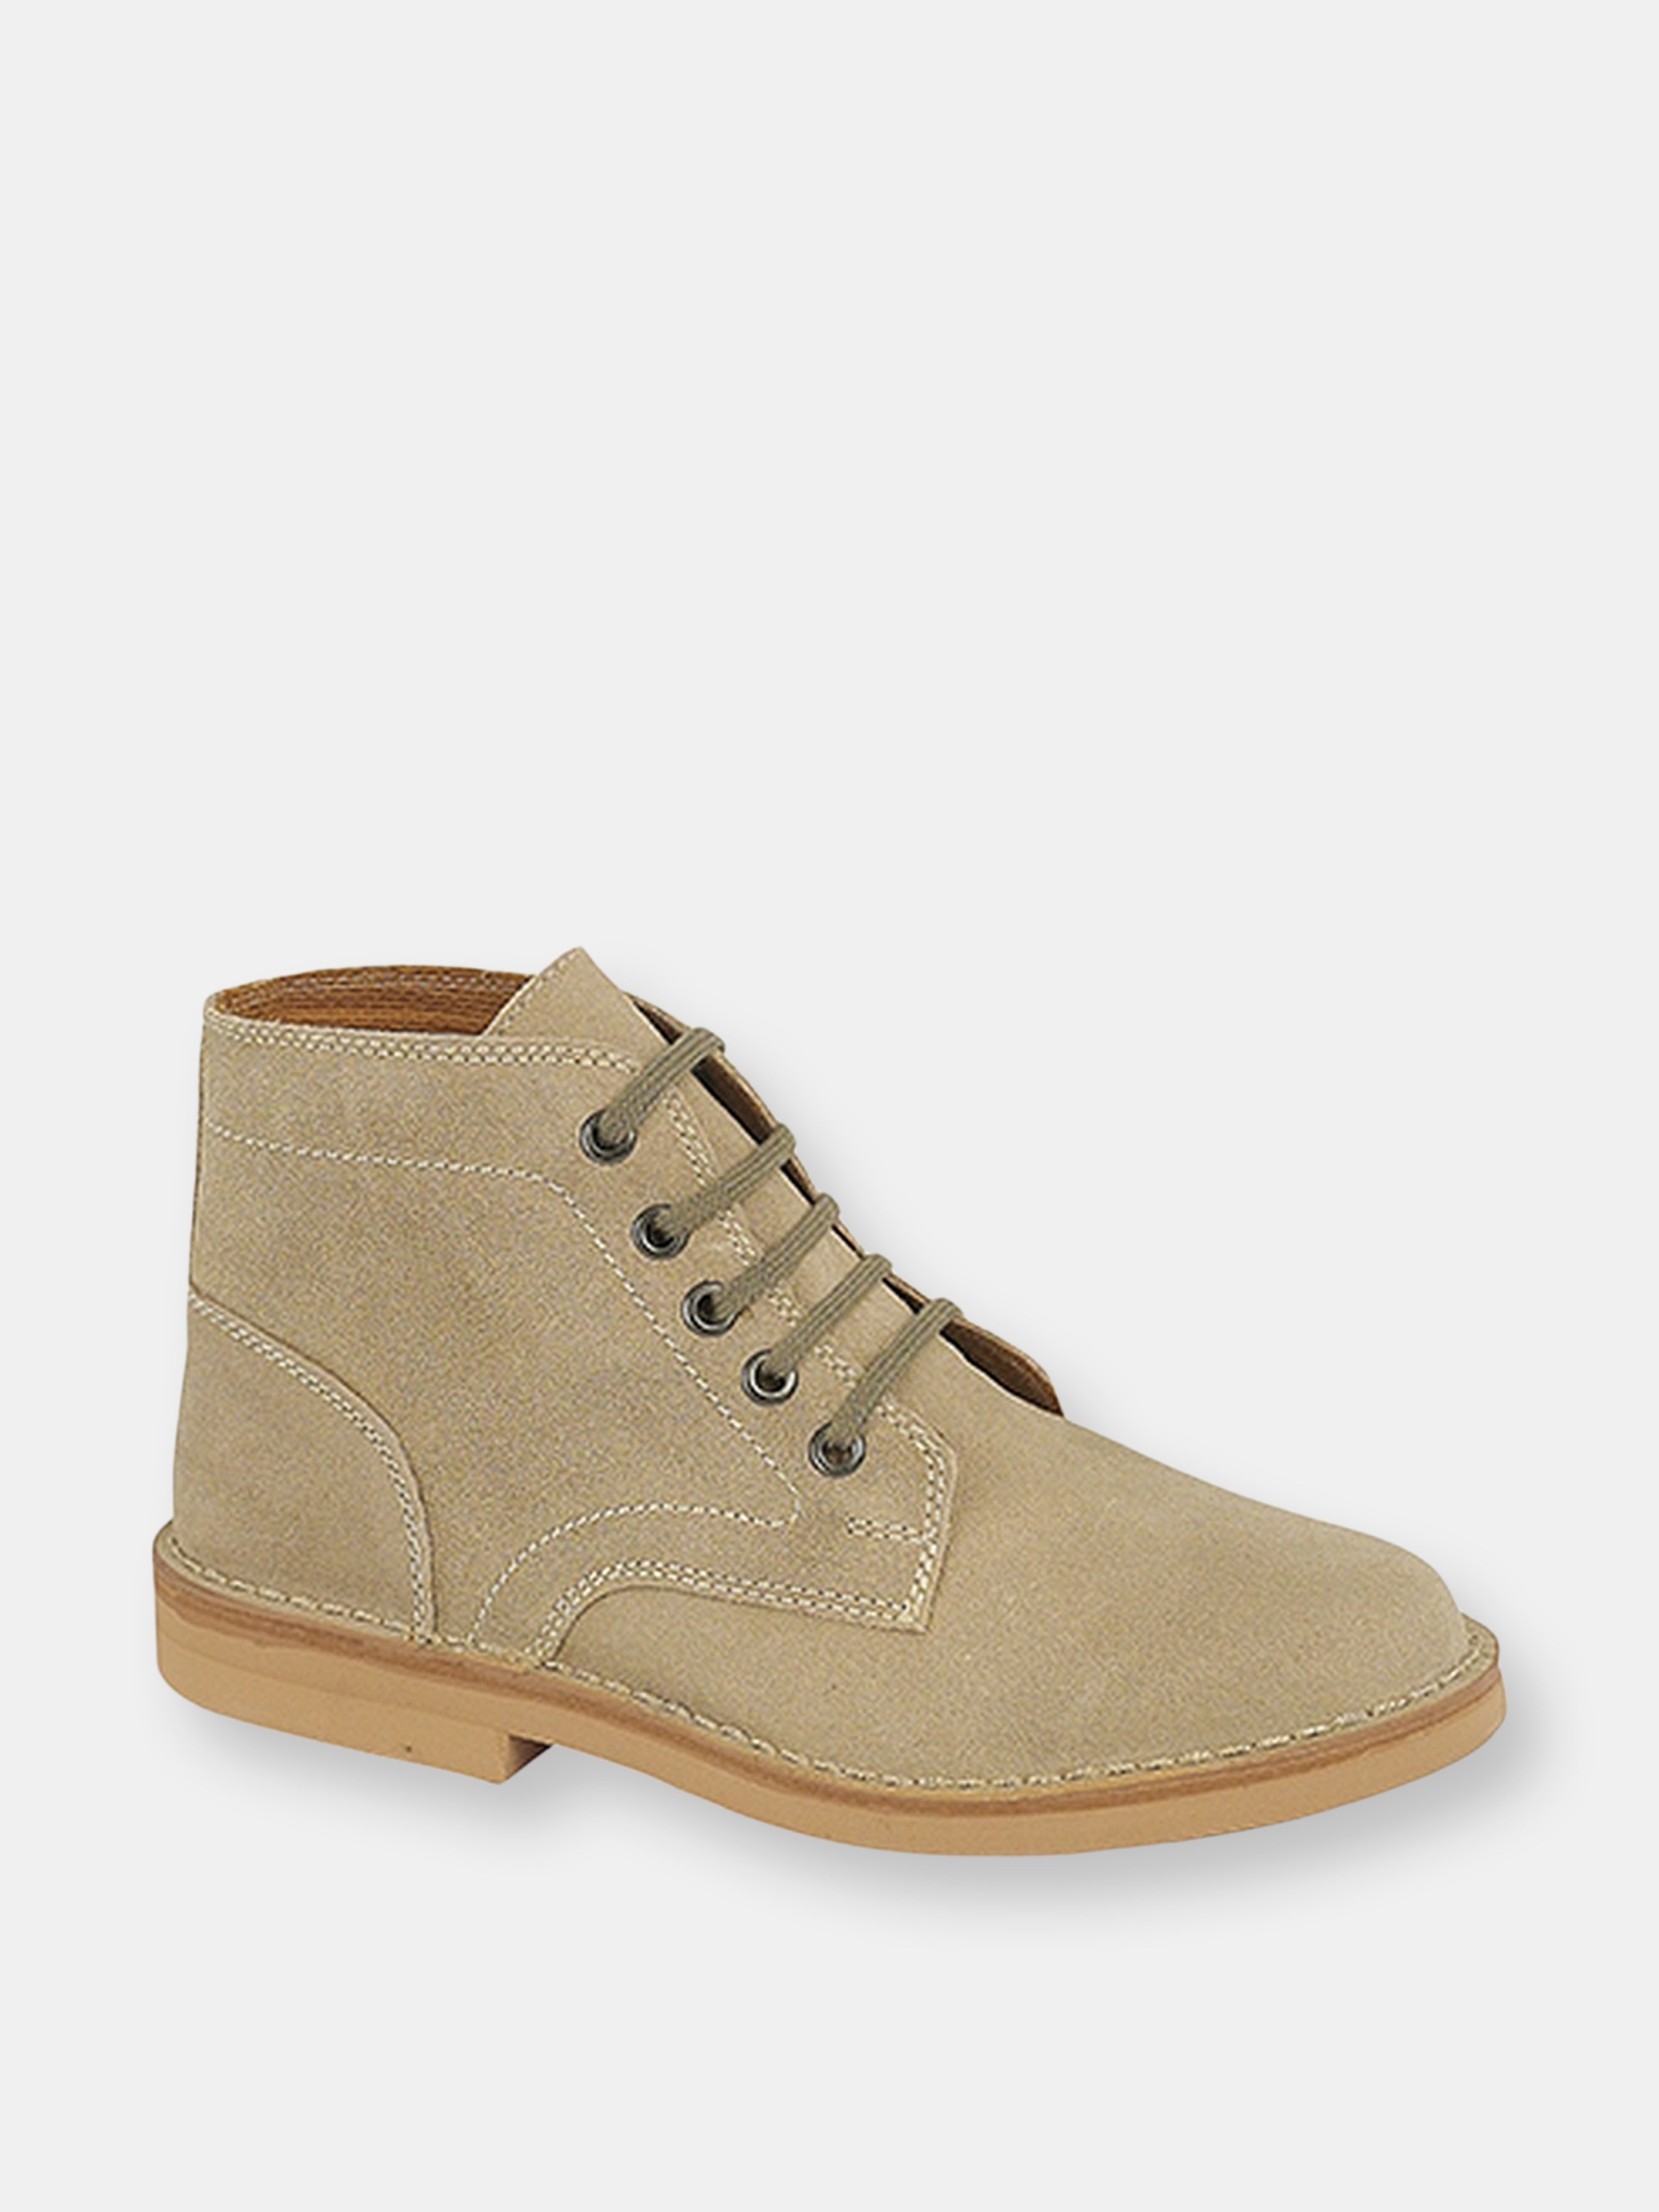 ROAMERS ROAMERS MENS REAL SUEDE LEISURE BOOTS